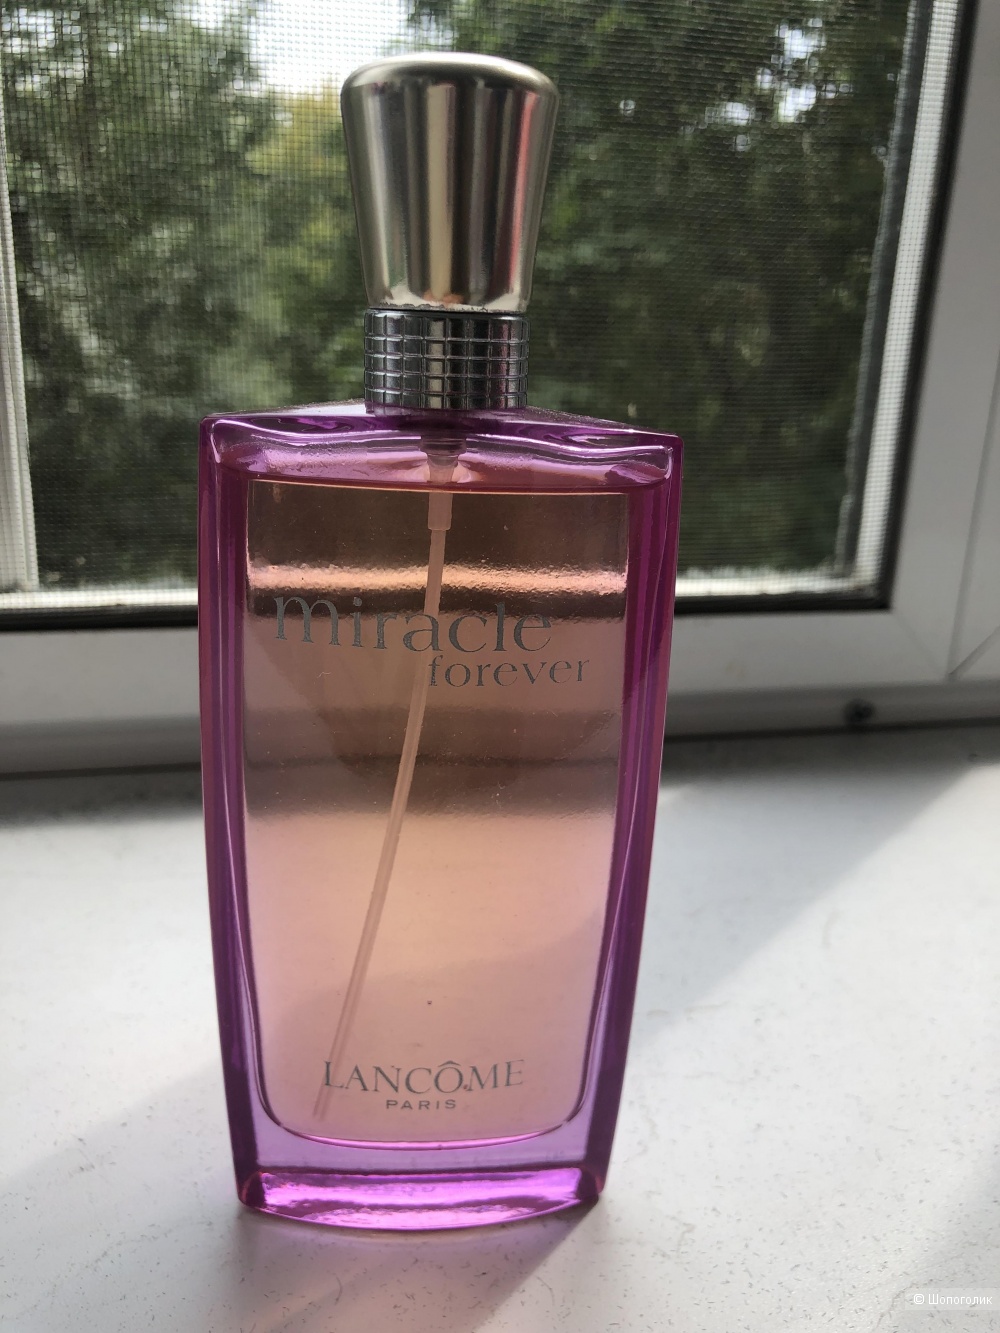 Парфюмерная вода Lancome "Miracle forever" 75 ml